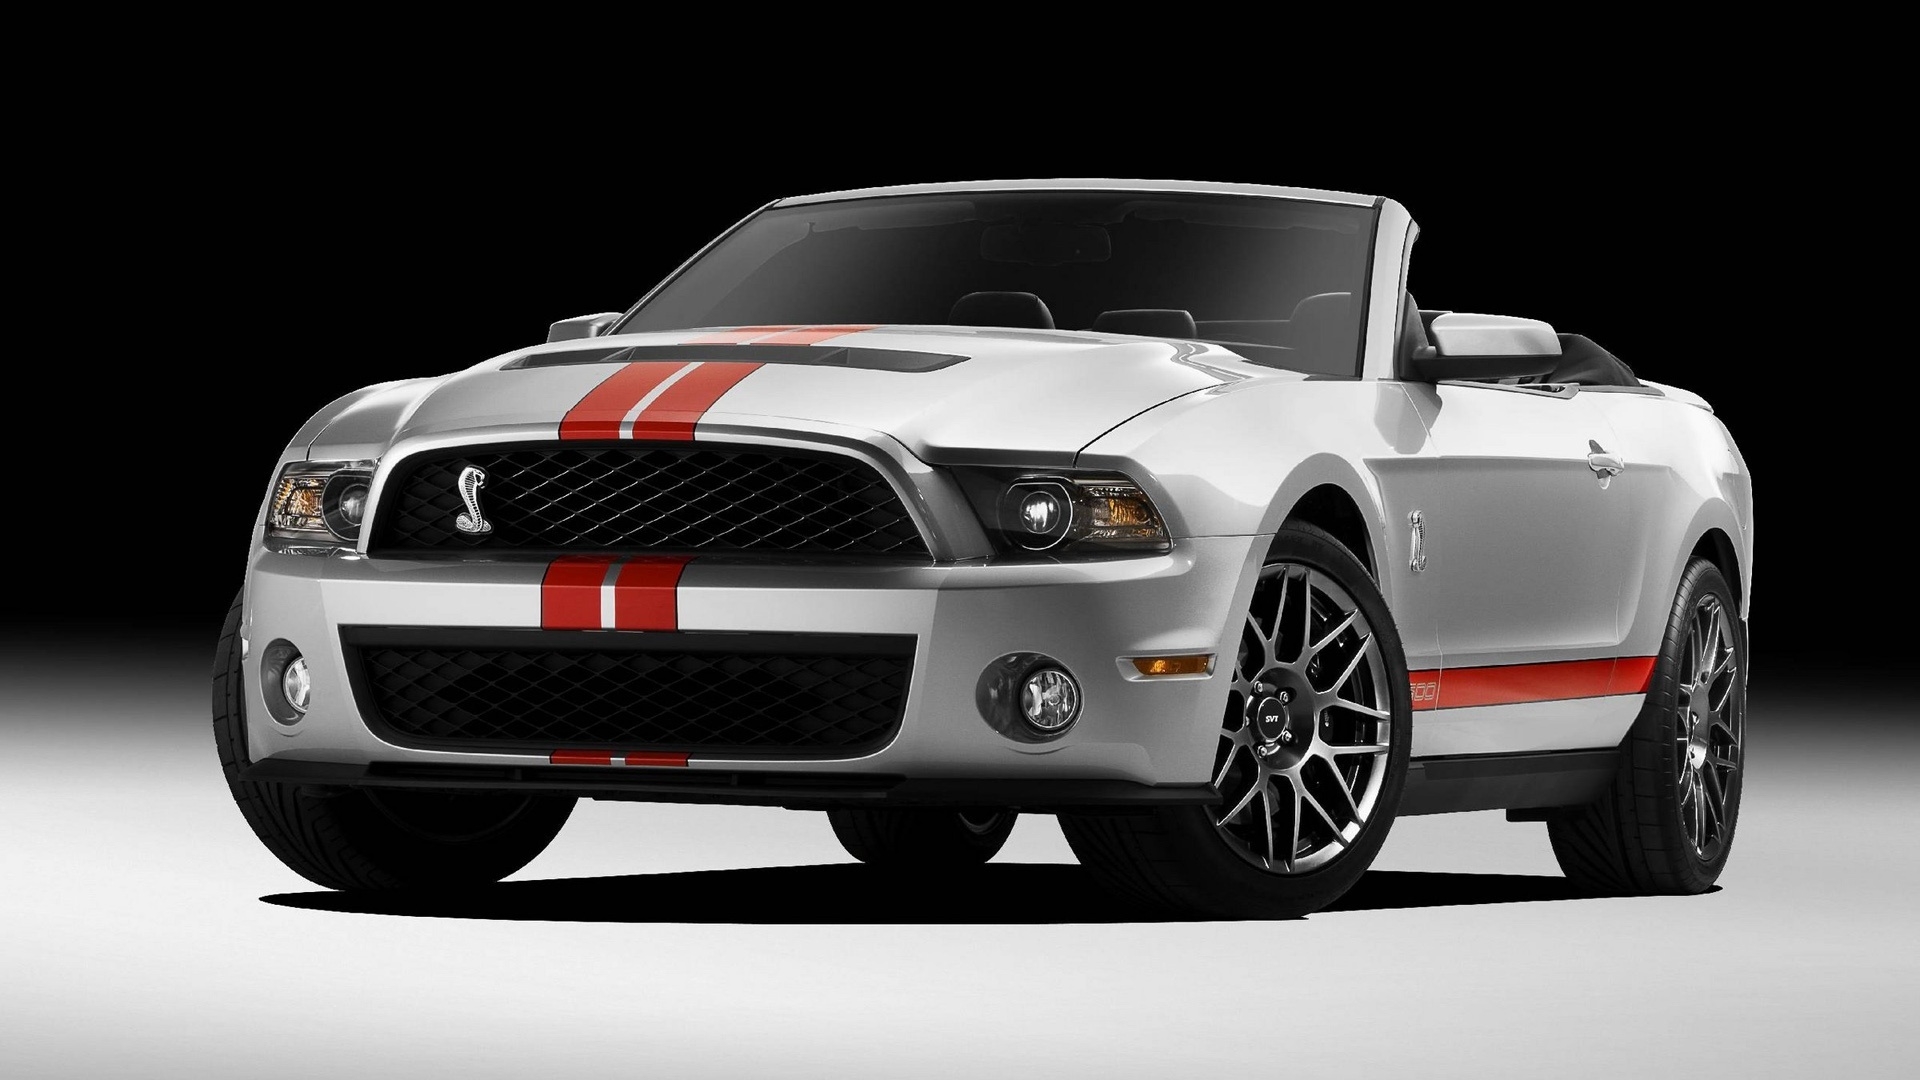 Ford Shelby GT500 Convertible 2010 for 1920 x 1080 HDTV 1080p resolution